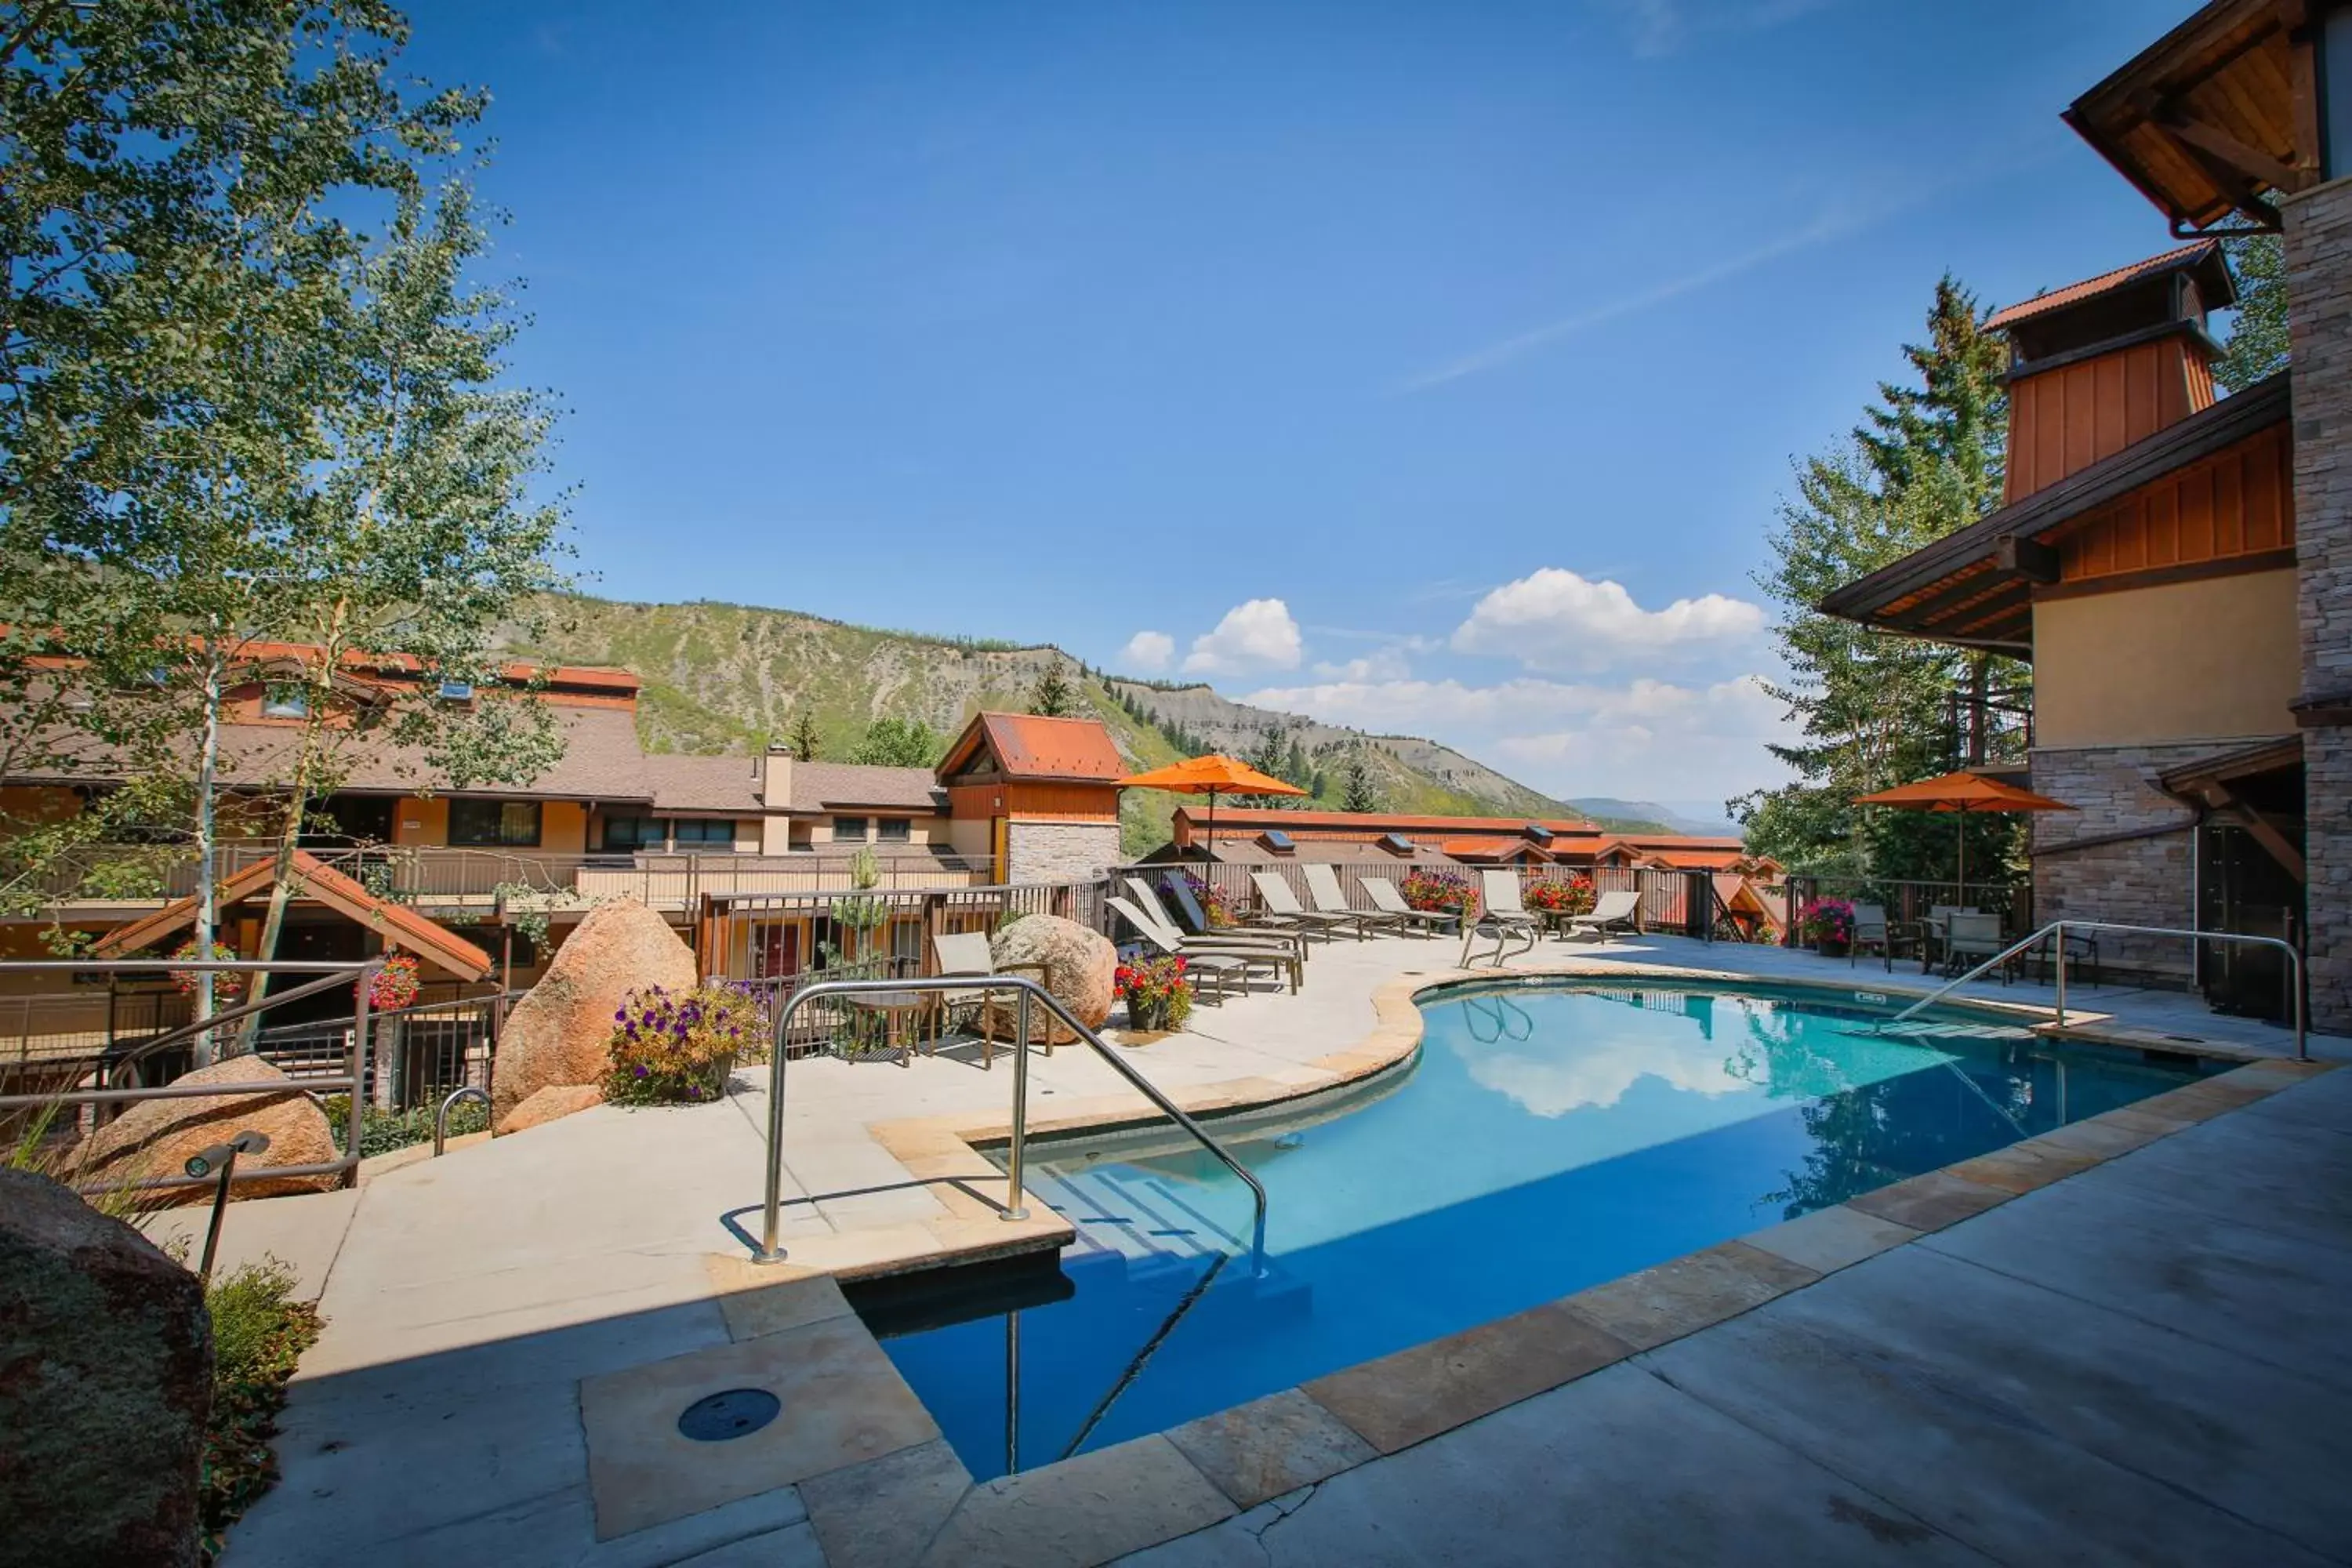 Swimming Pool in The Crestwood Snowmass Village